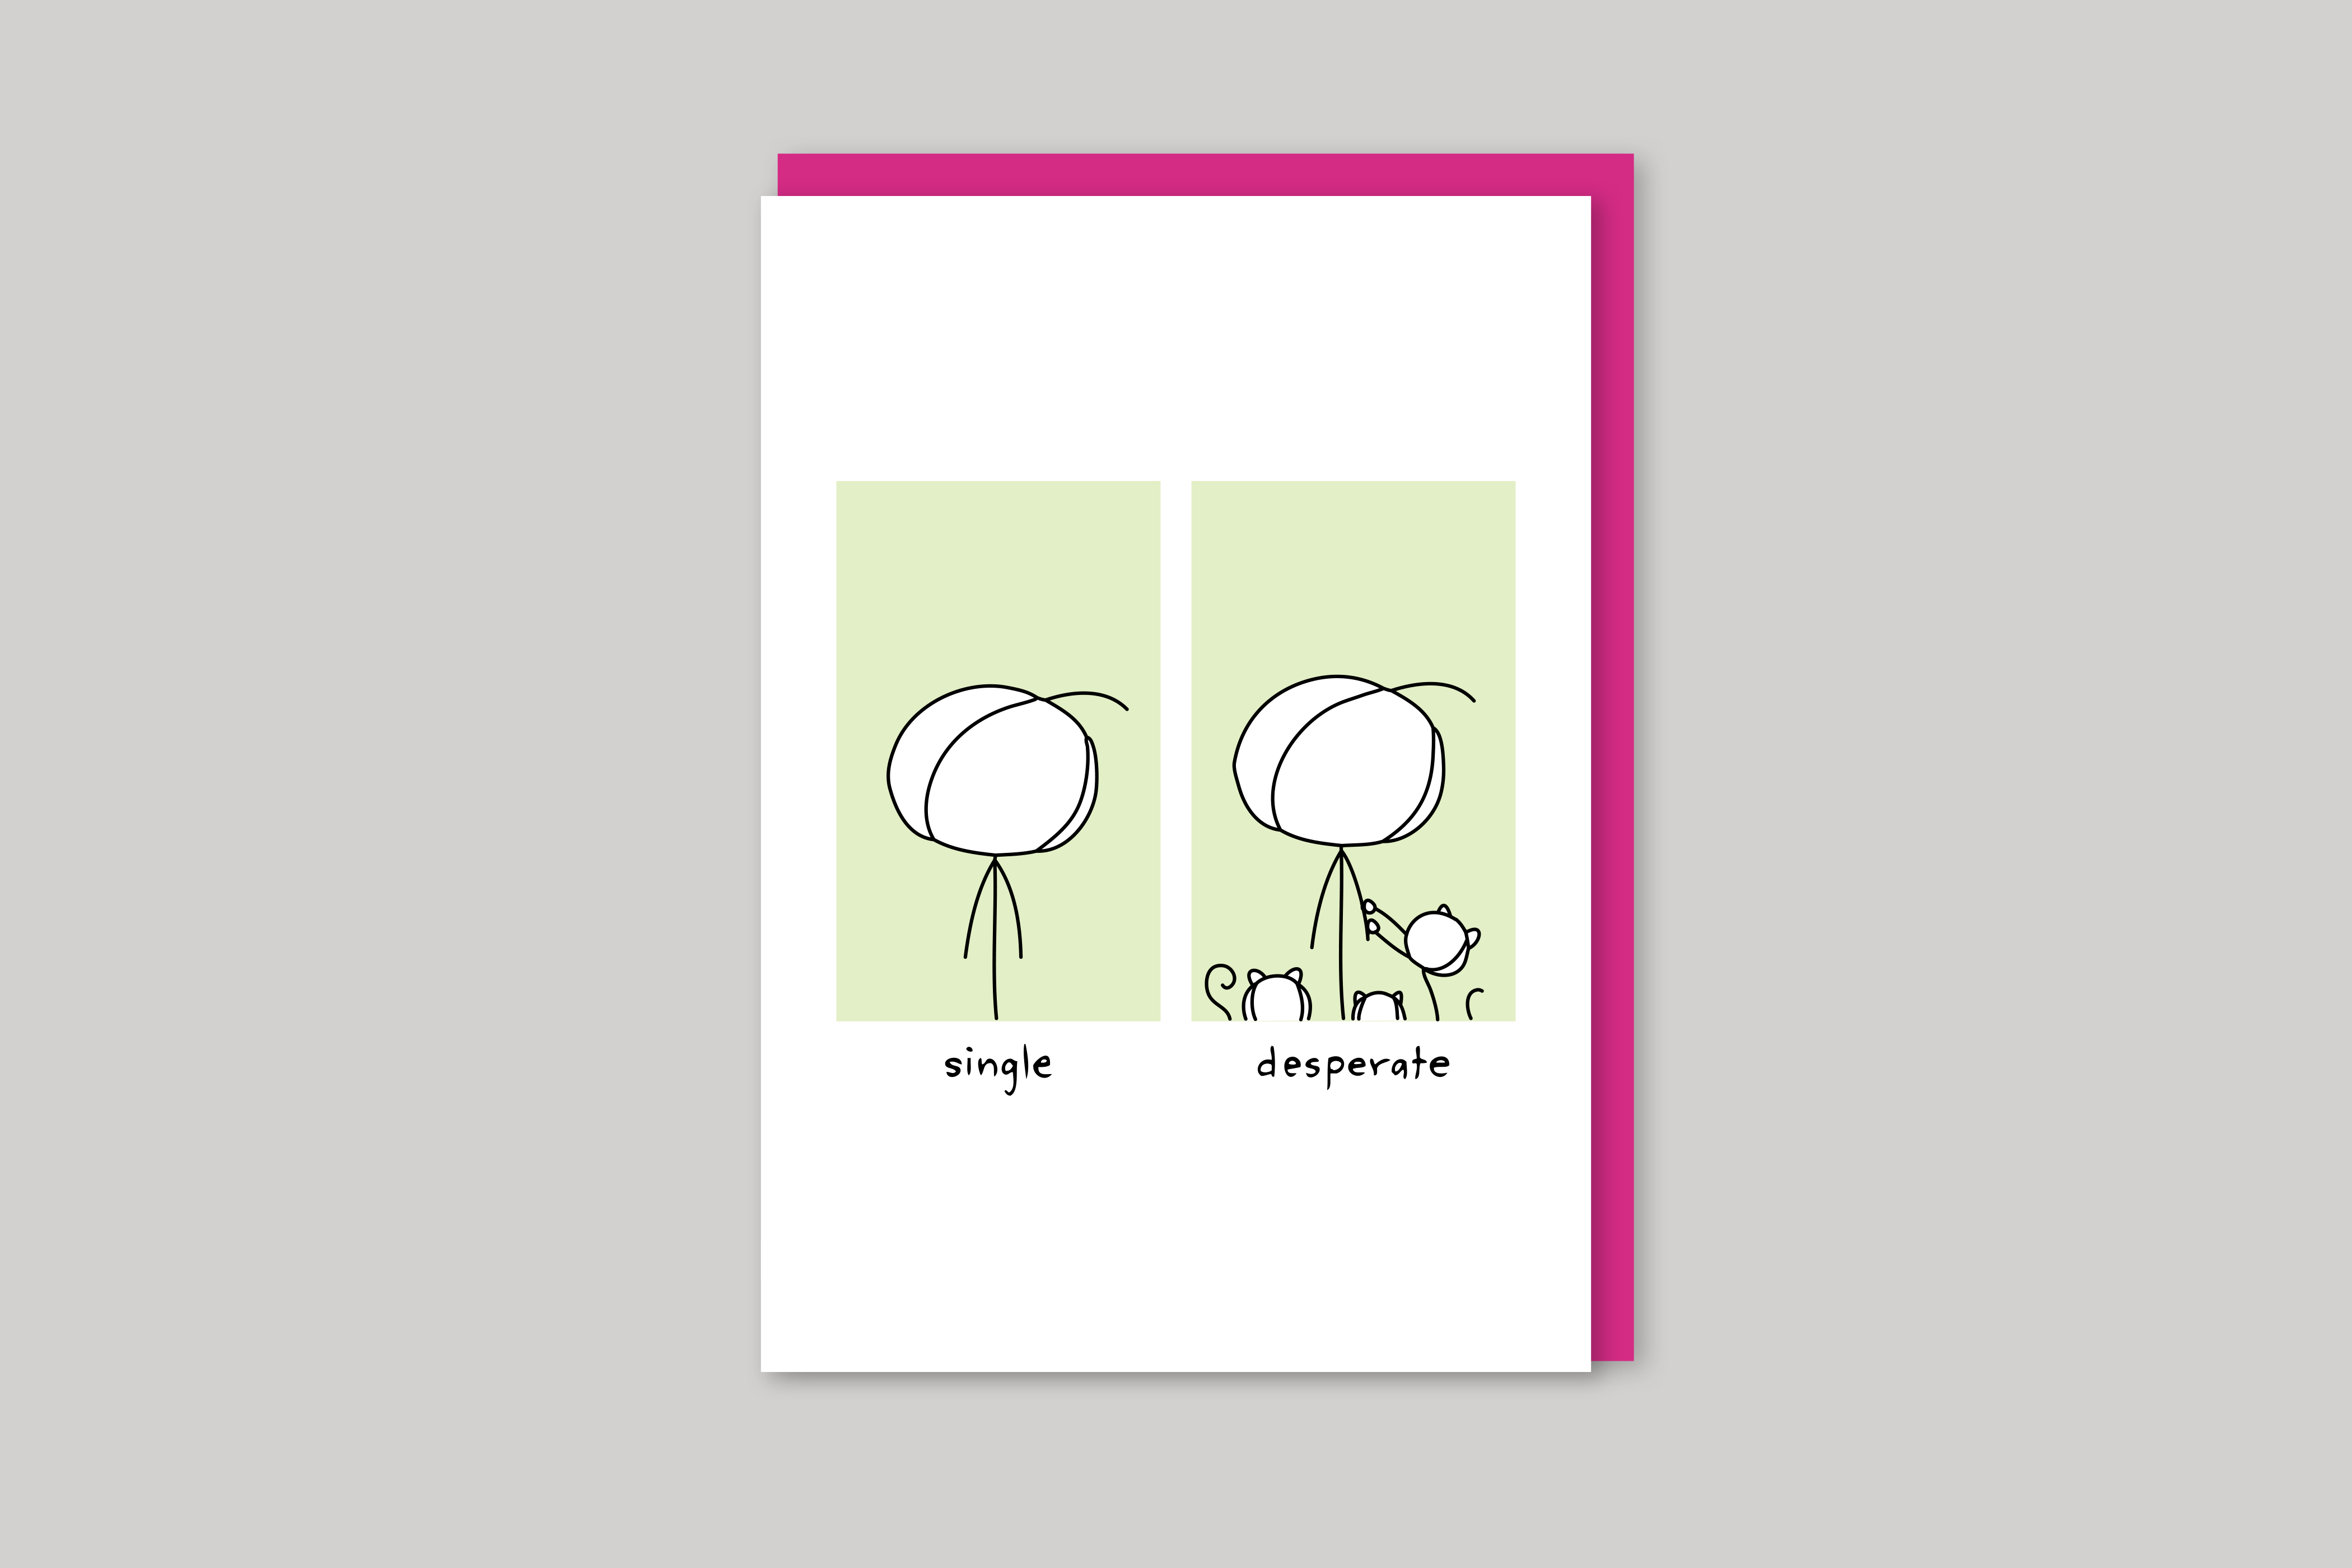 Single/Desperate humorous illustration from Mean Cards range of greeting cards by Icon, back page.